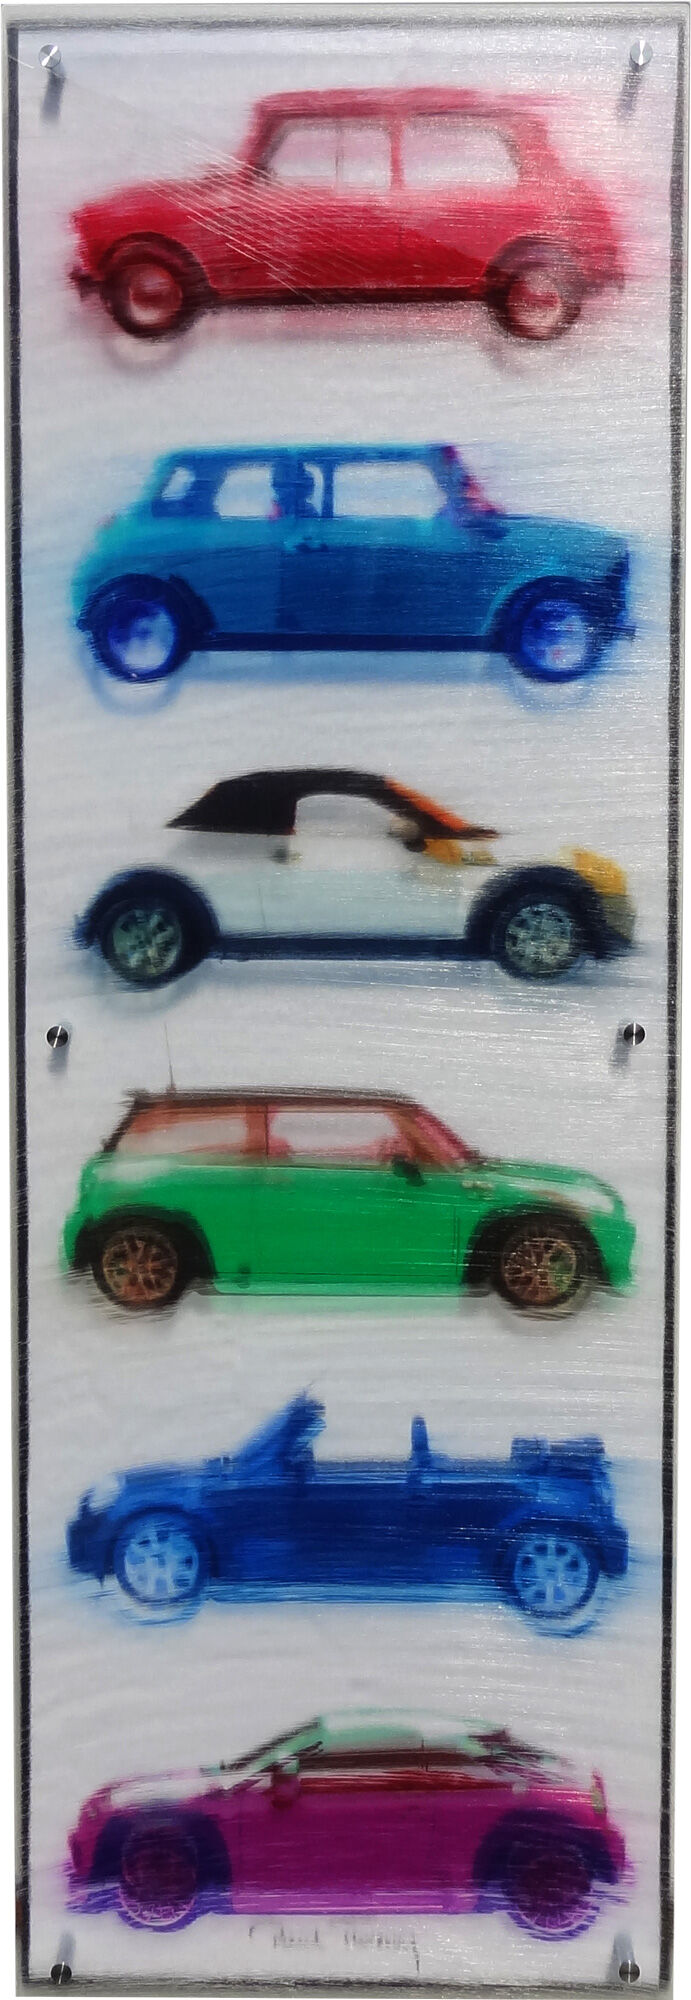 Picture "Mini" (2017) by Paul Thierry